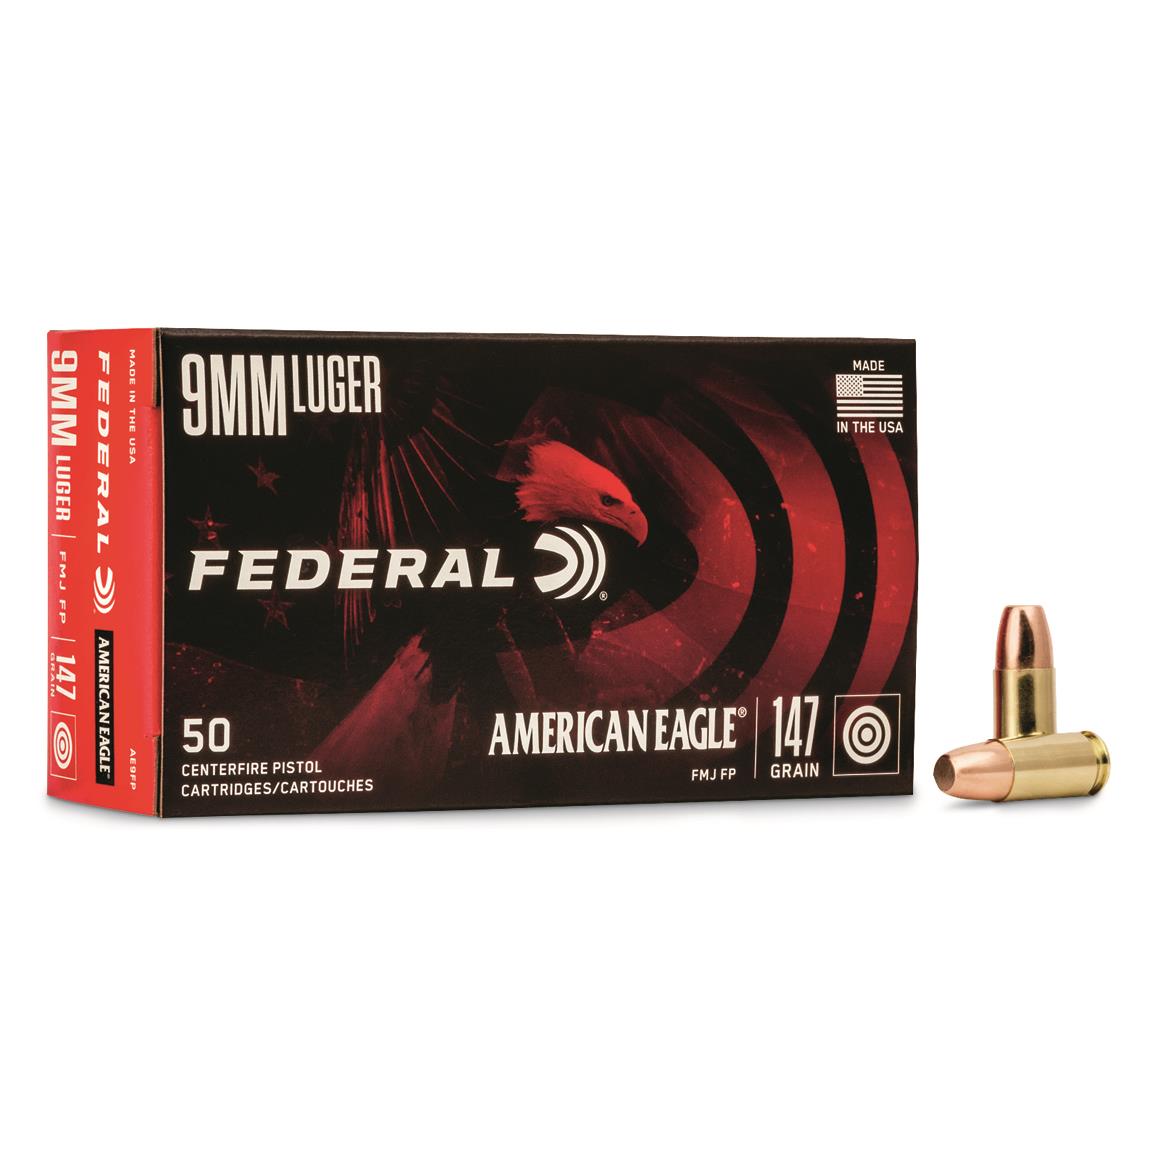 Federal American Eagle 9mm Luger FMJFP 147 Grain 500 Rounds 12204 